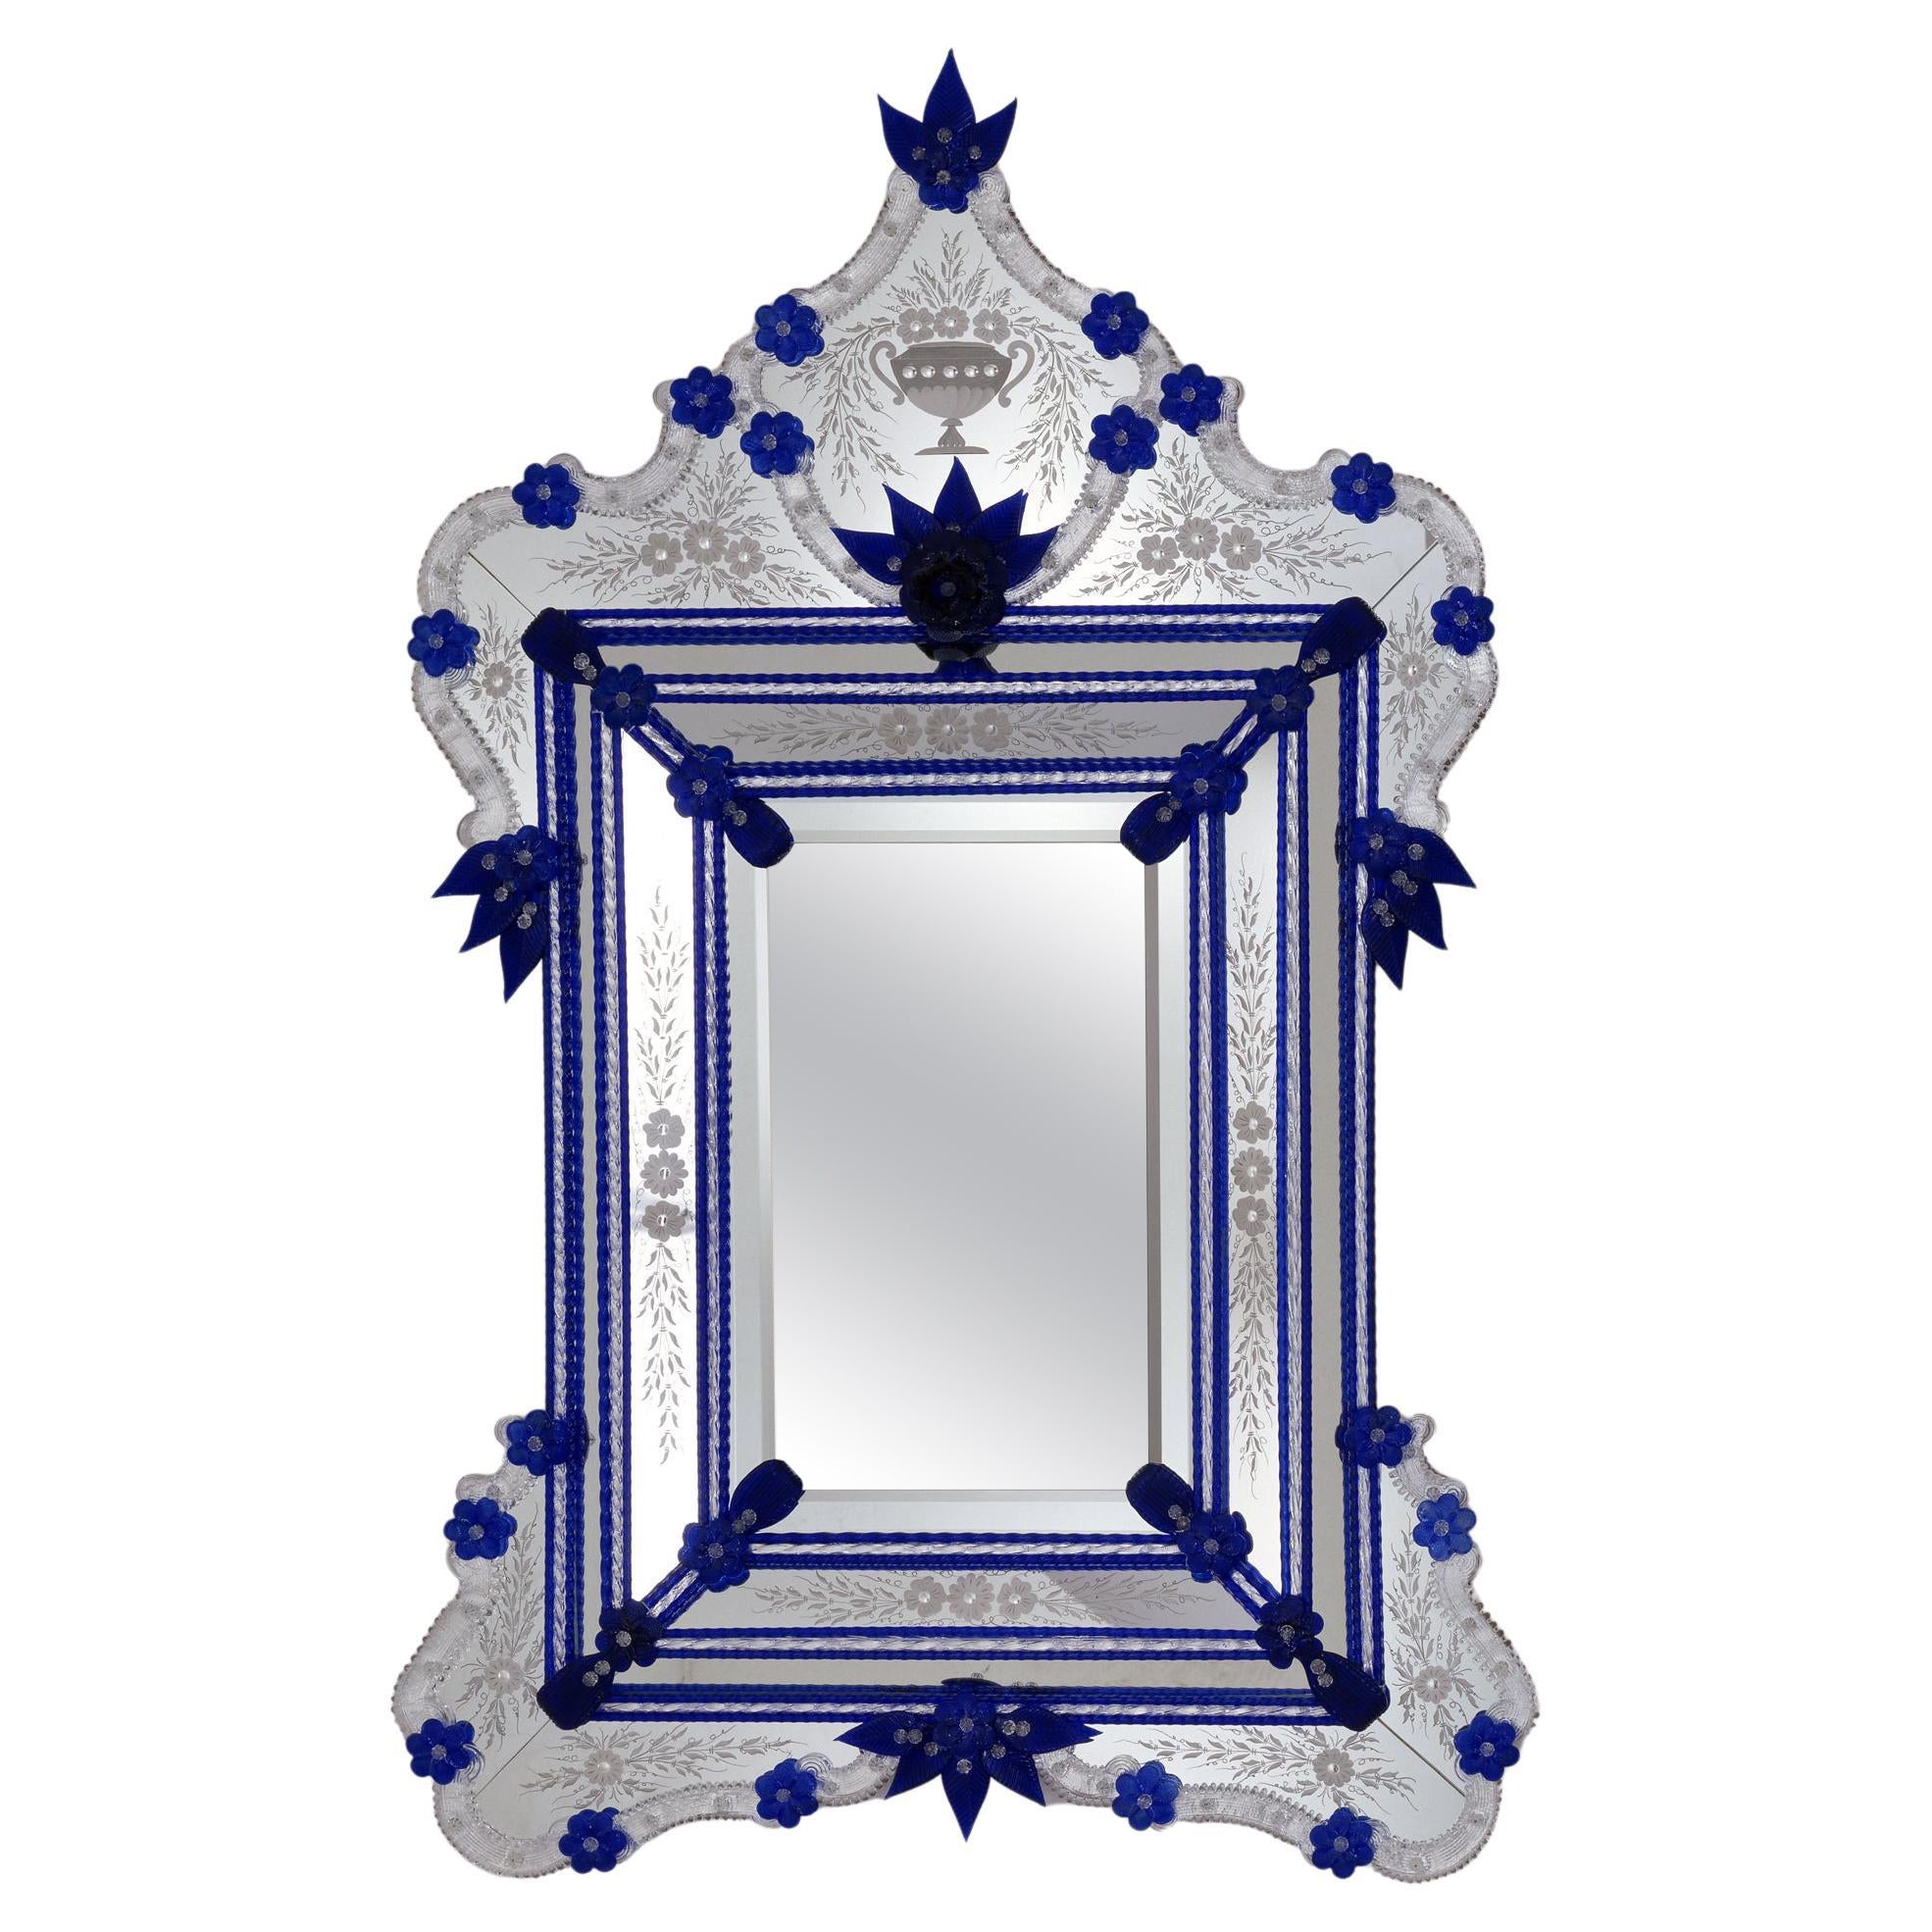 "Chiara" Murano Glass Mirror in Venetian Style by Fratelli Tosi For Sale